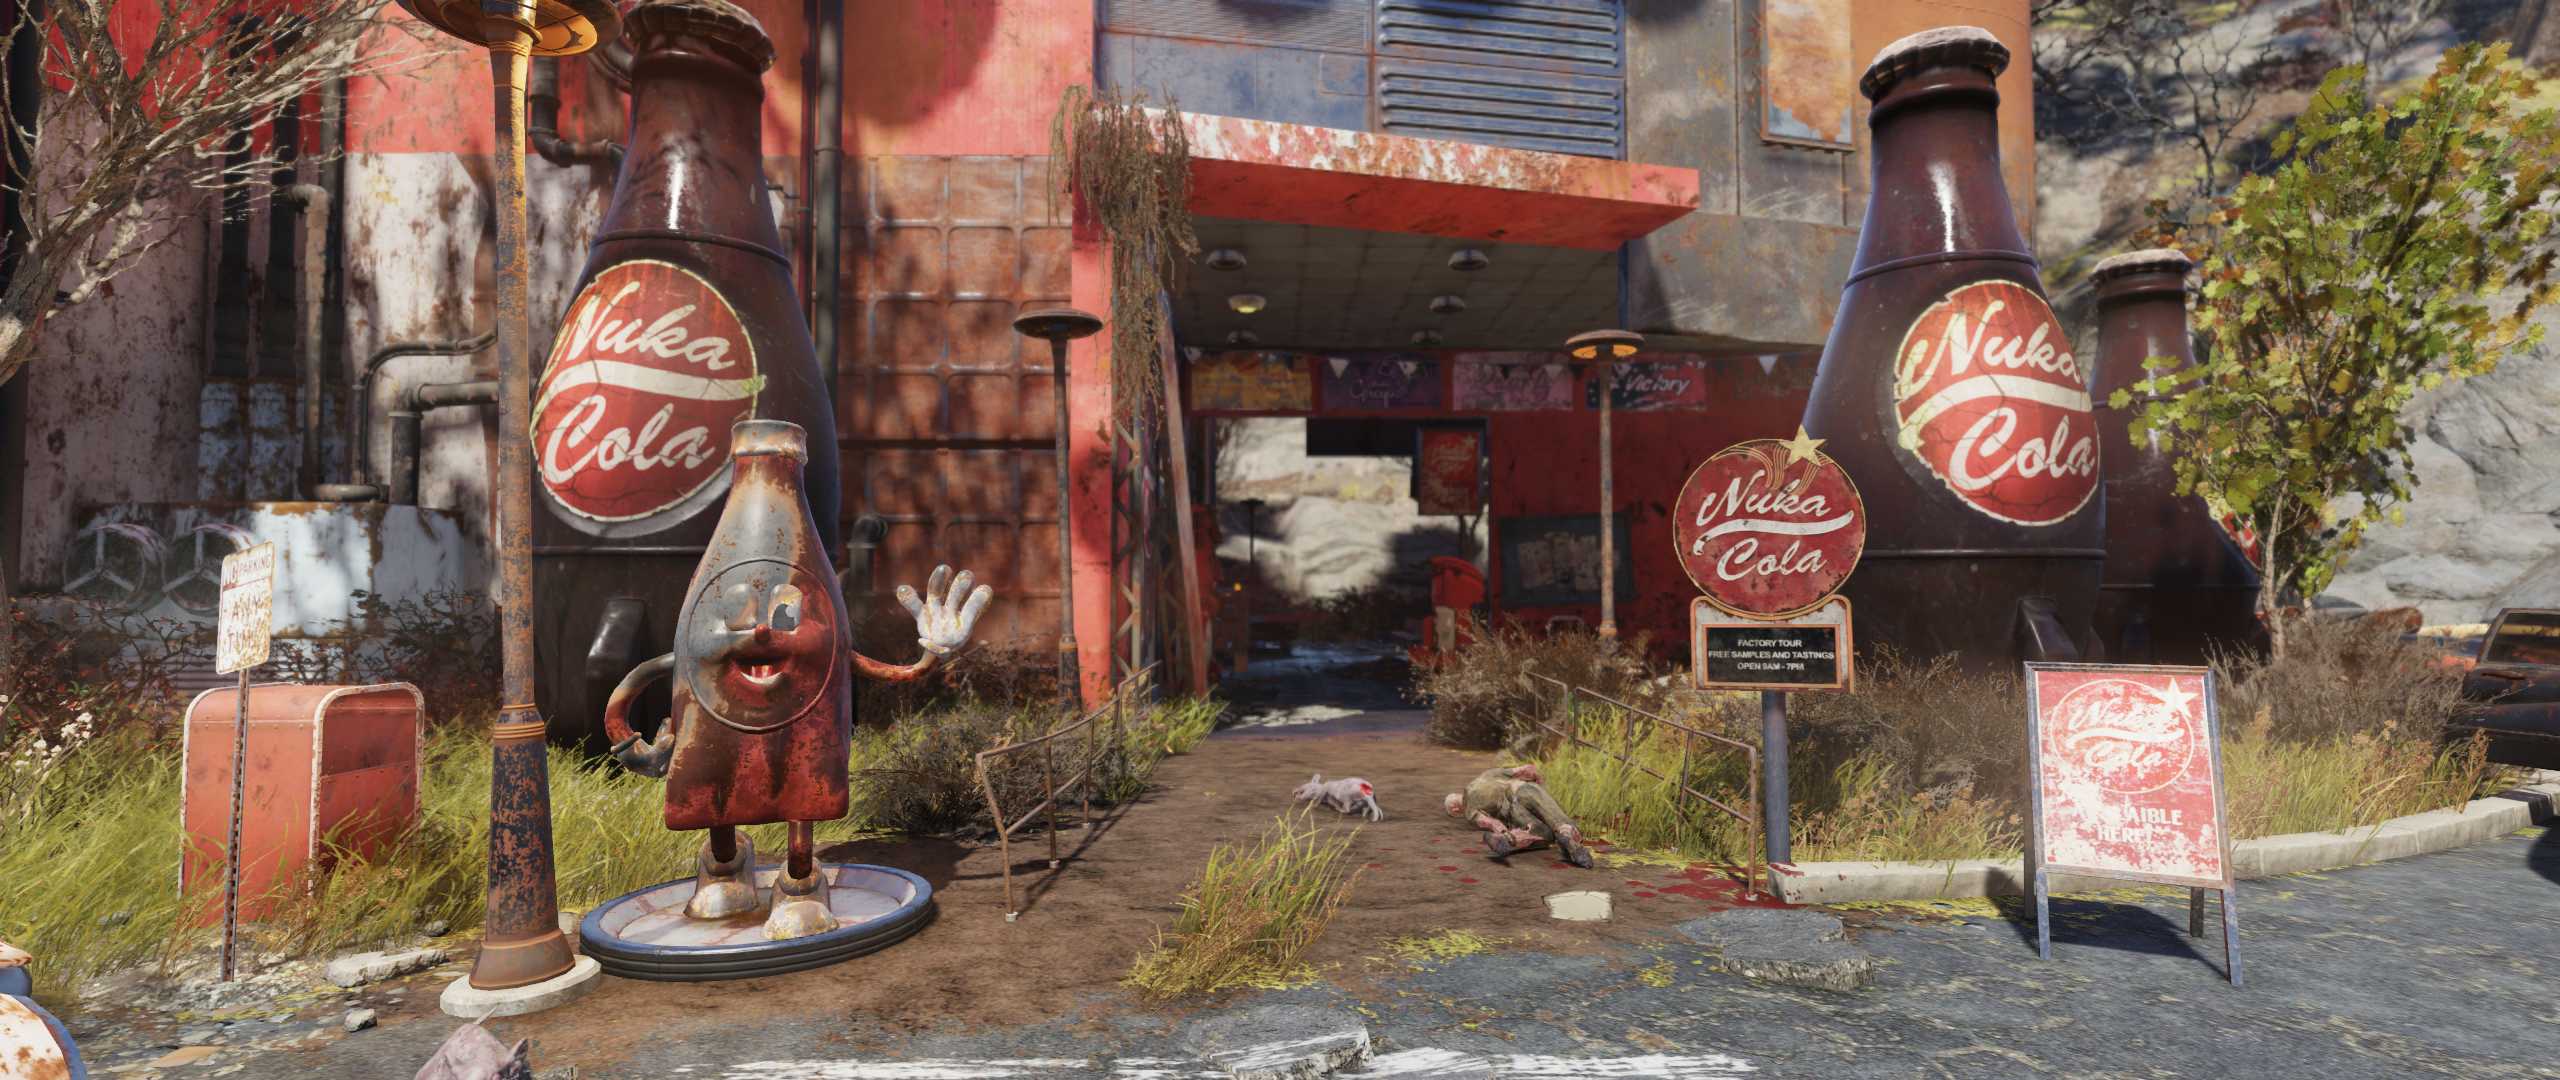 Fallout 76 Nuka Cola Rüstung Ort 4